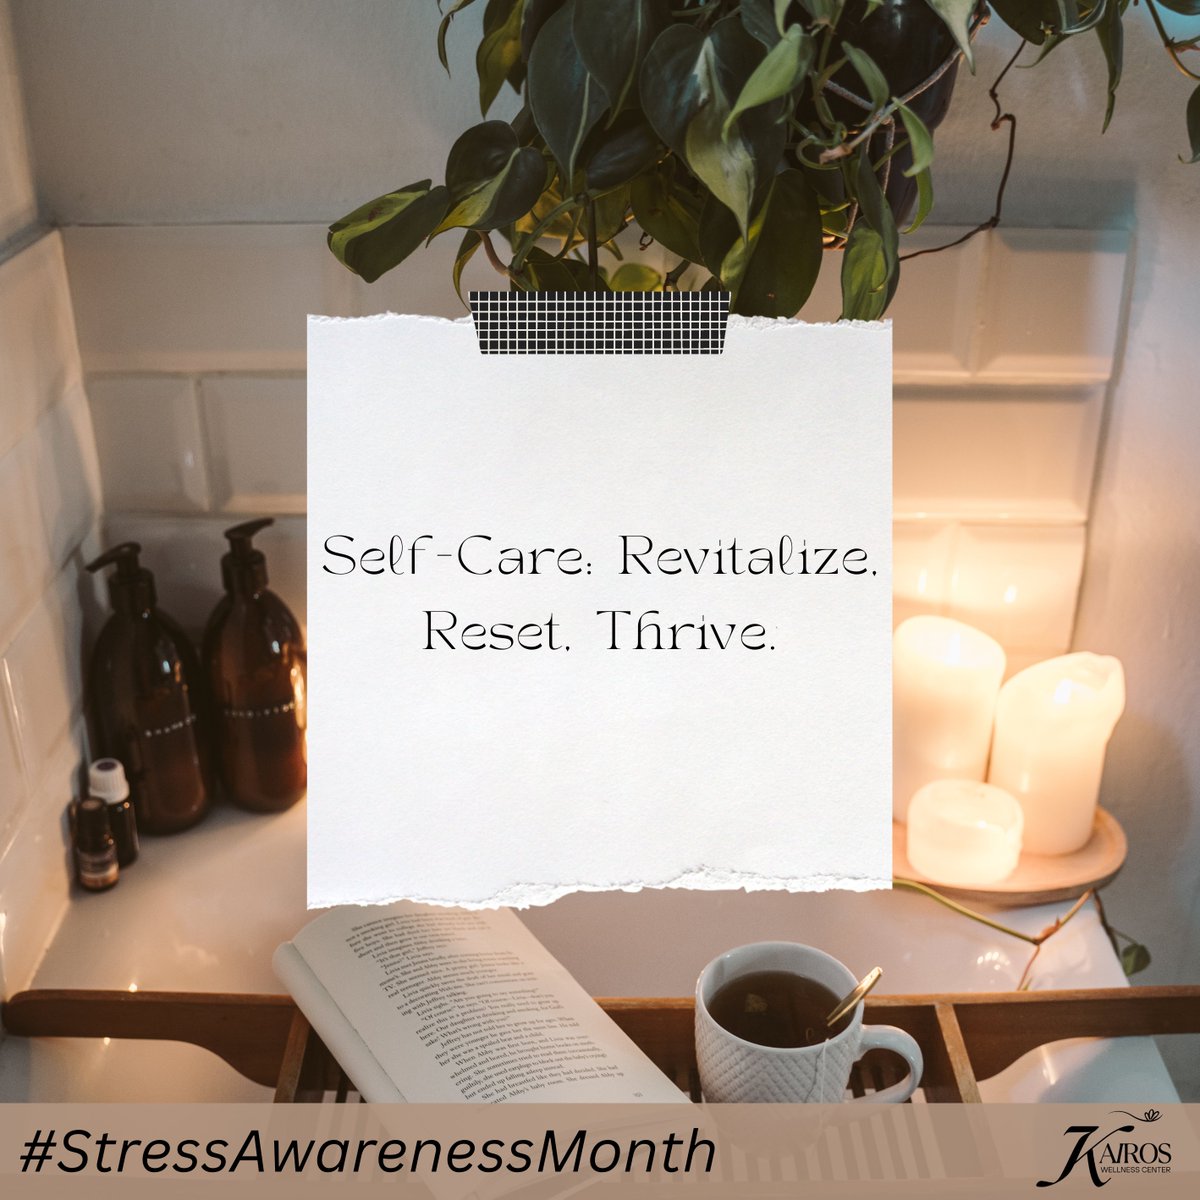 Taking care of yourself plays an important role in decreasing your stress. Below are a few tools to consider adding this week to your wellness toolkit:

1. Increase movement.
2. Make good nutritional choices and hydrate.
3. Prioritize your sleep.

#stressawarenessmonth